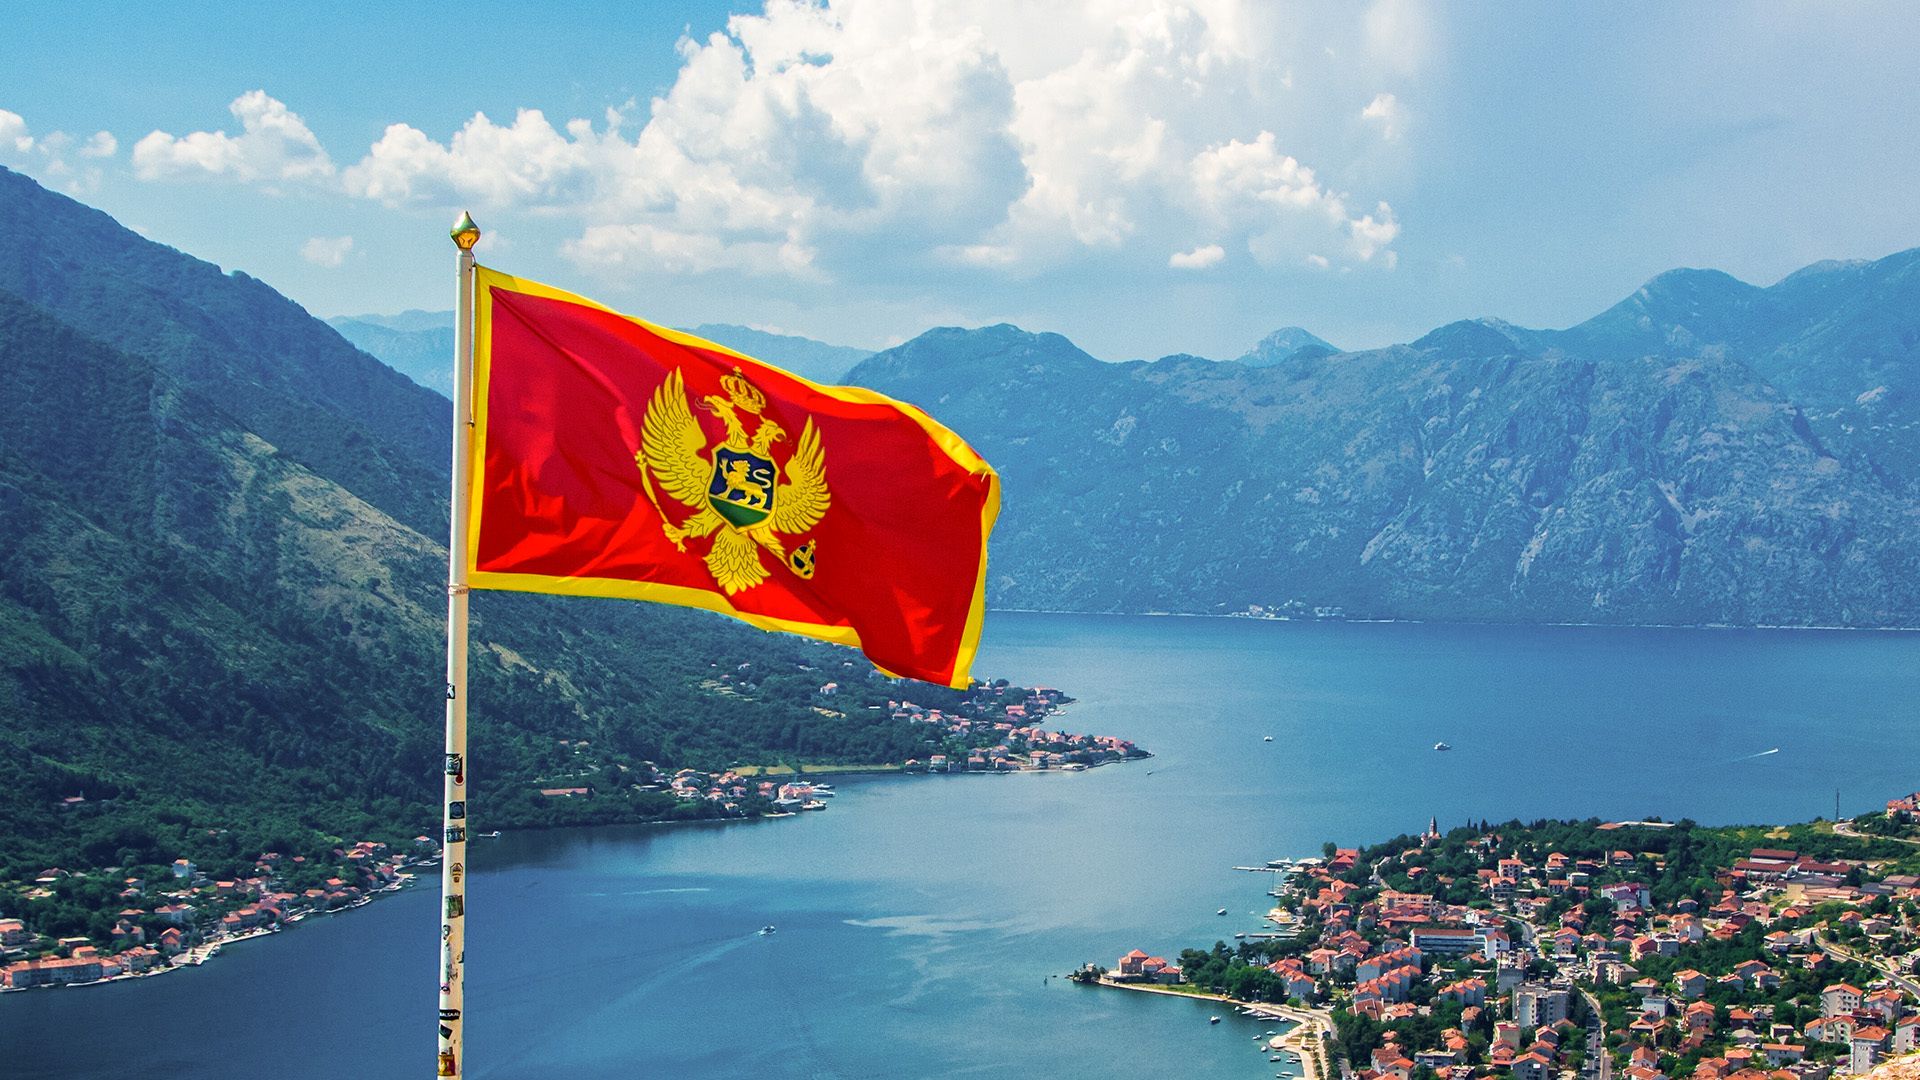 Montenegro flag waving in front of riverside and mountain landscape.